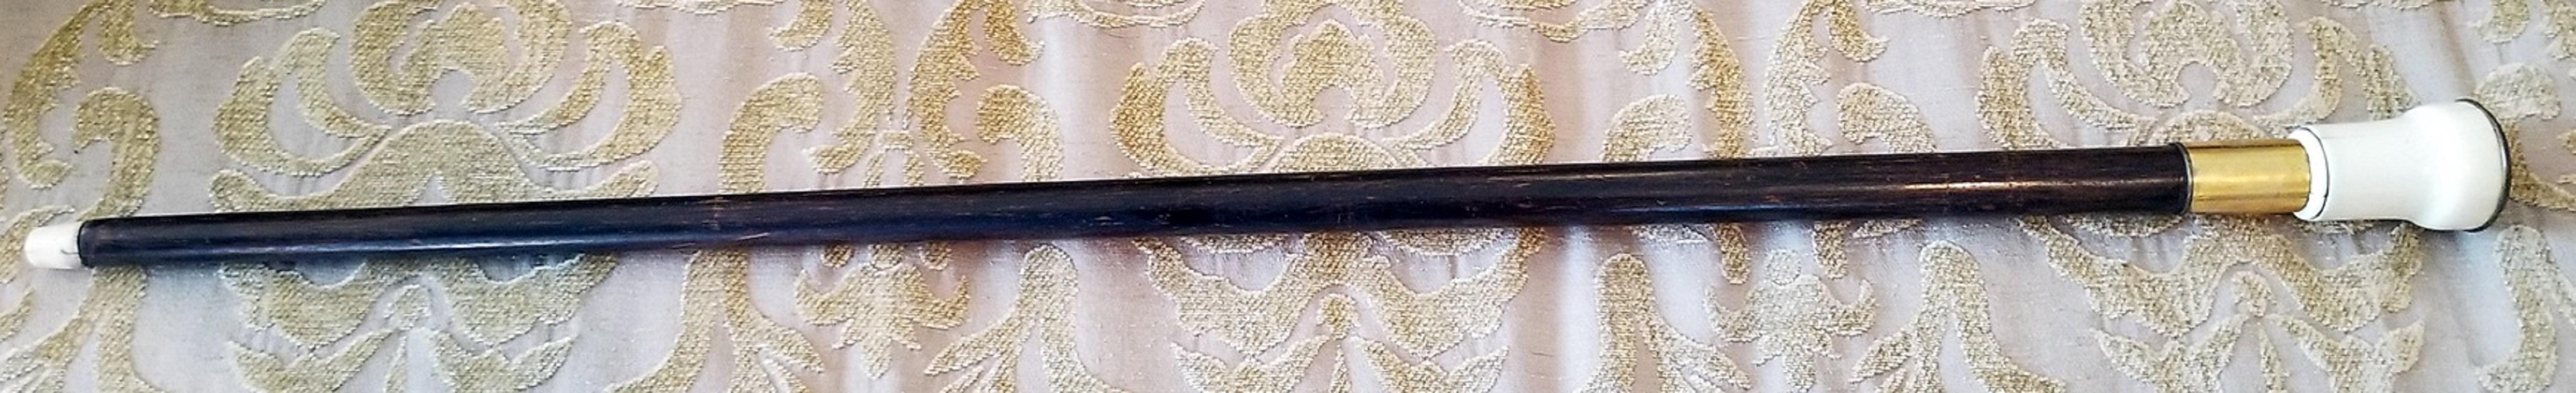 Fantastic walking stick from circa 1860.
Presenting a very rare walking cane from the 19th century.
British.
This walking stick was definitely 'custom made' for a Gambler !!!!
It sports a set of three gaming dice in bone handle under a glass